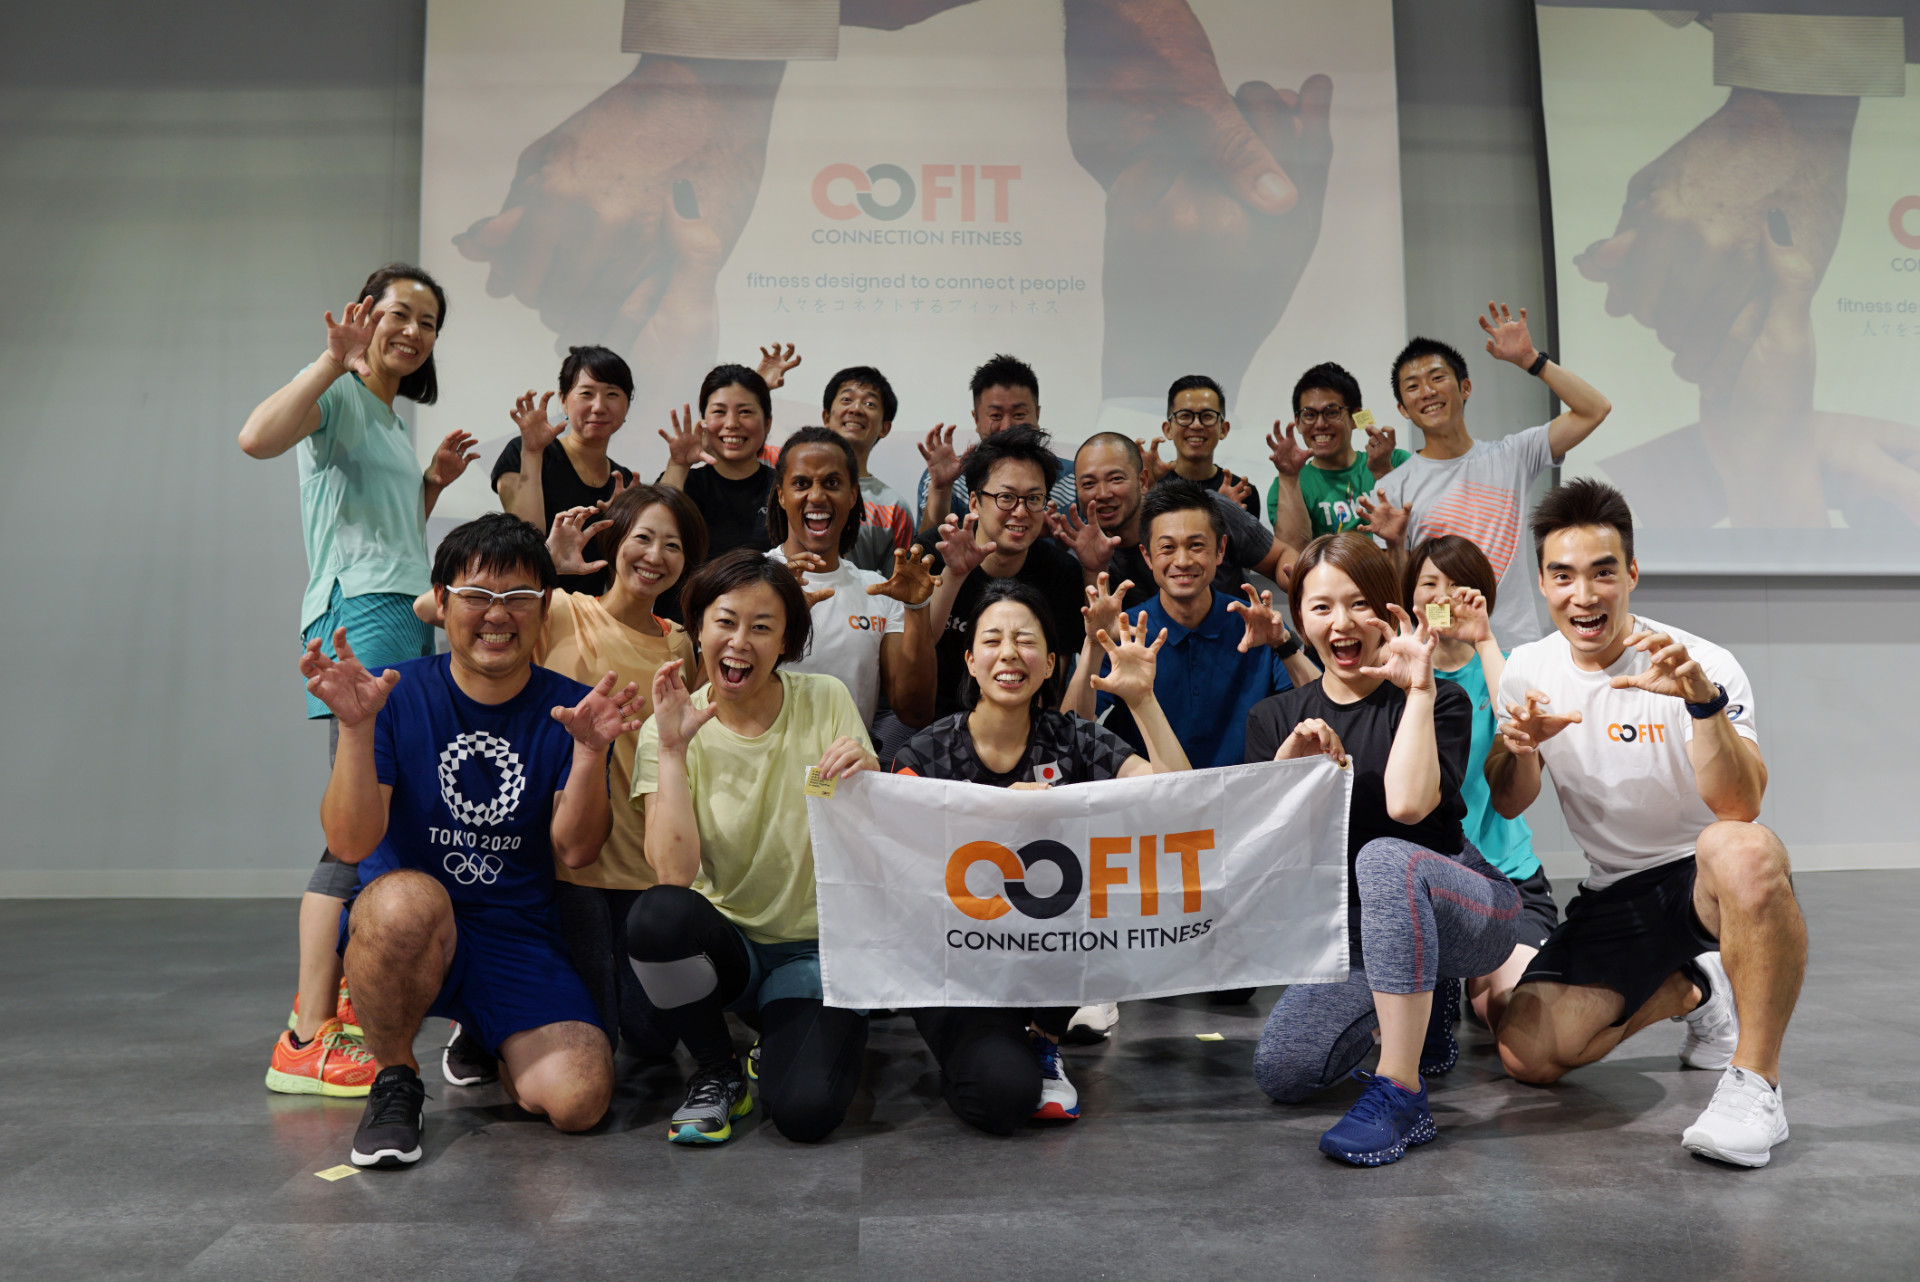 Cofit Asics Japan Office Connection Fitness Group Photo